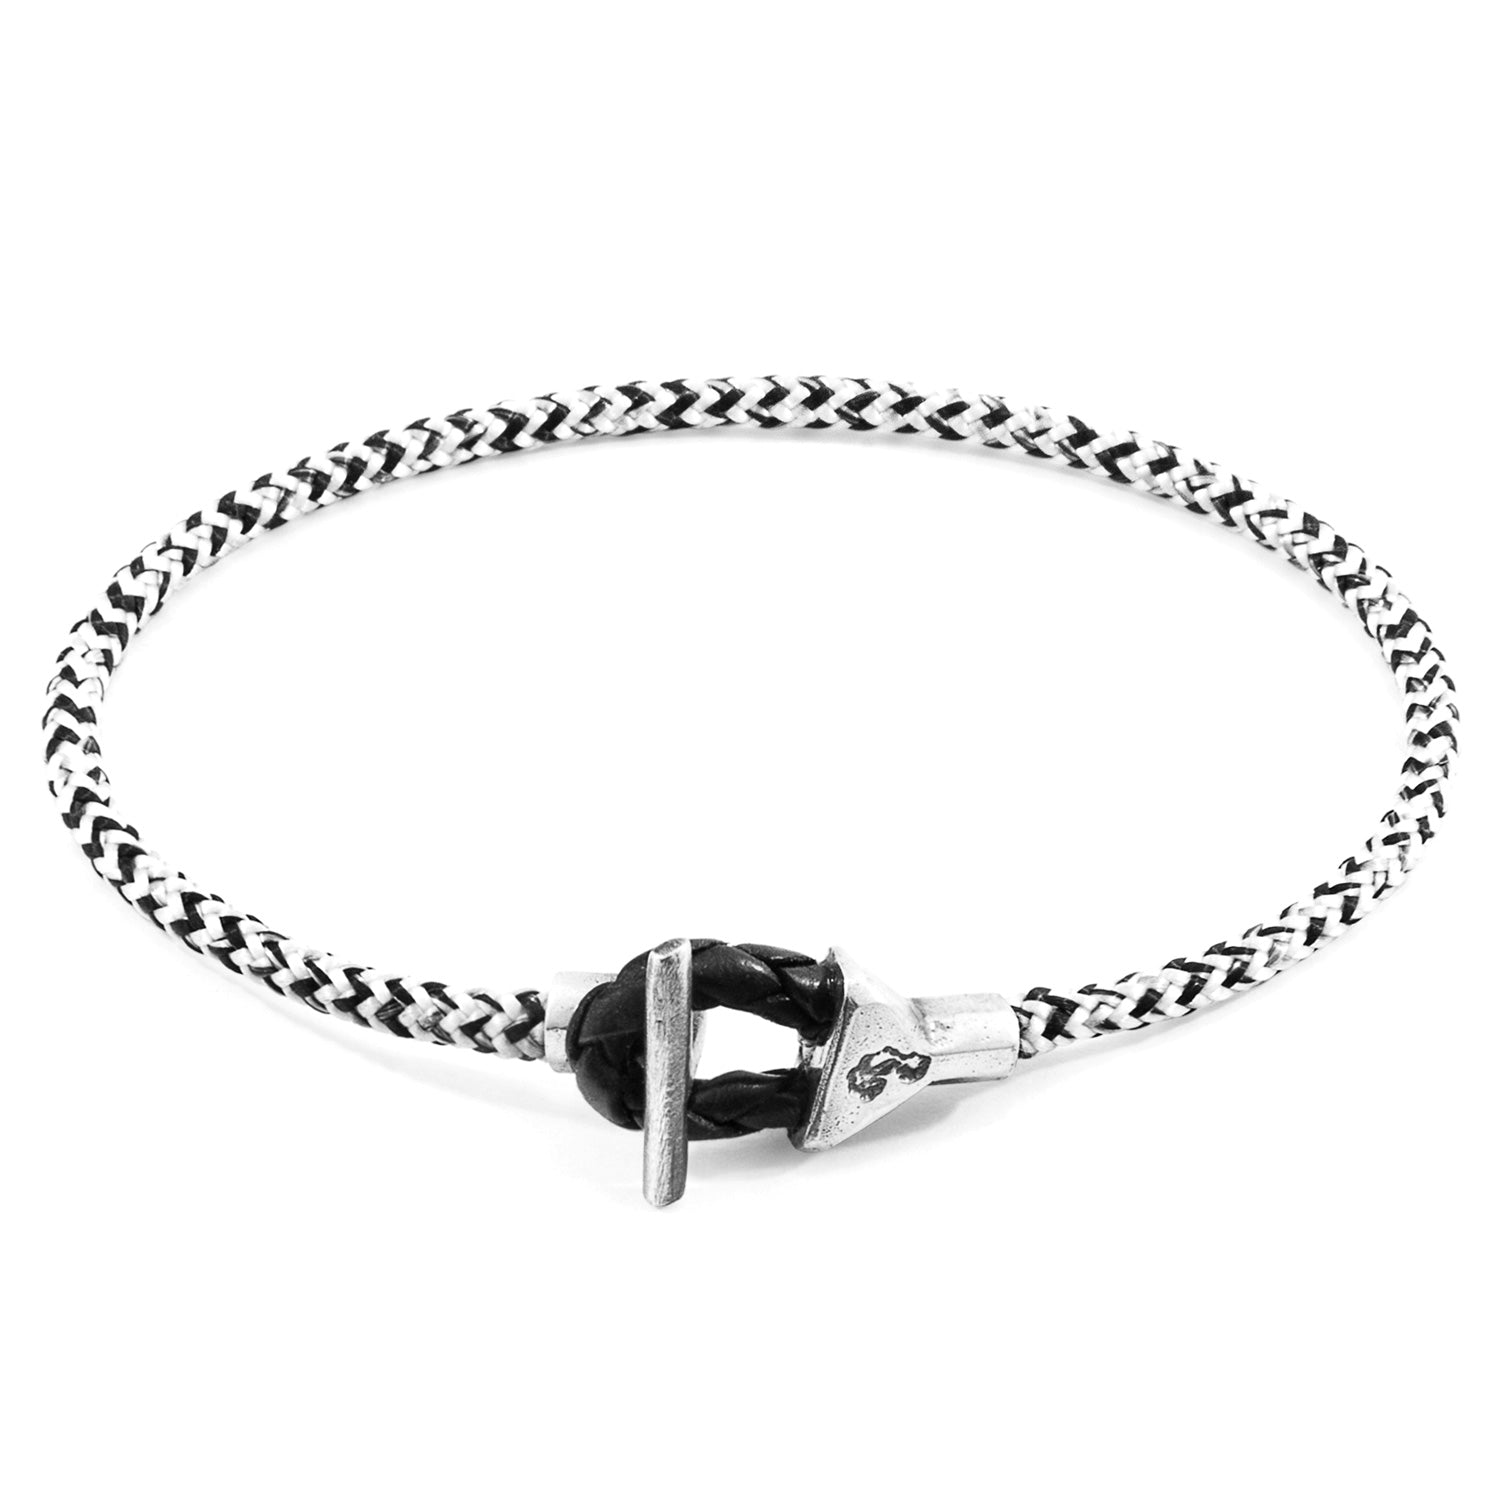 White Noir Cullen Silver and Rope Bracelet: Handcrafted in Great Britain with Marine Grade Rope and Sterling Silver Clasp - Bracelets - Bijou Her -  -  - 